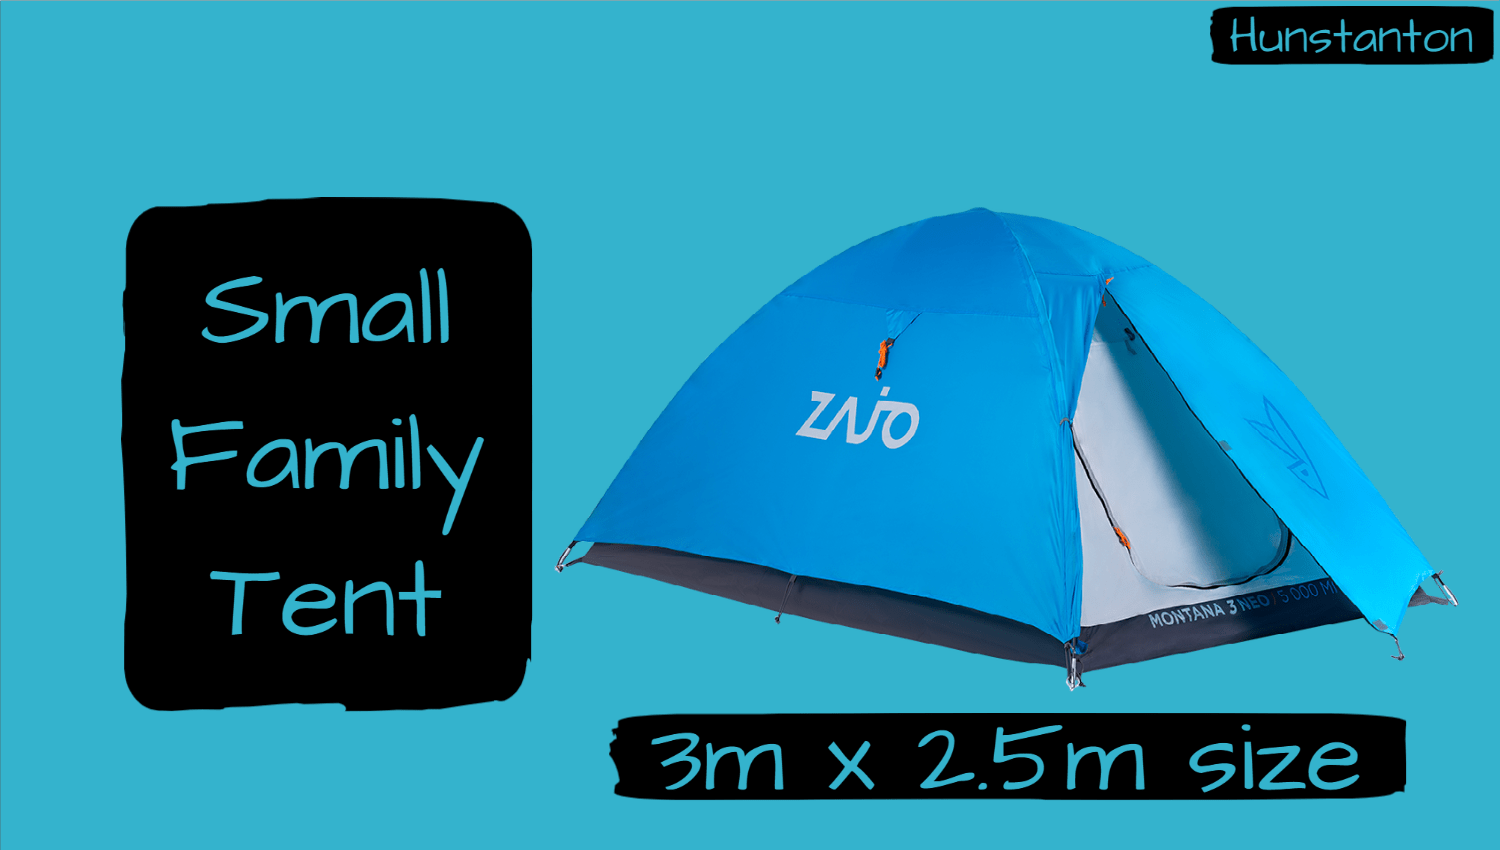 https://www.norfolkcoast-cottage.co.uk/images/heacham/camping/pitch-sizes/Small-Family-H.png